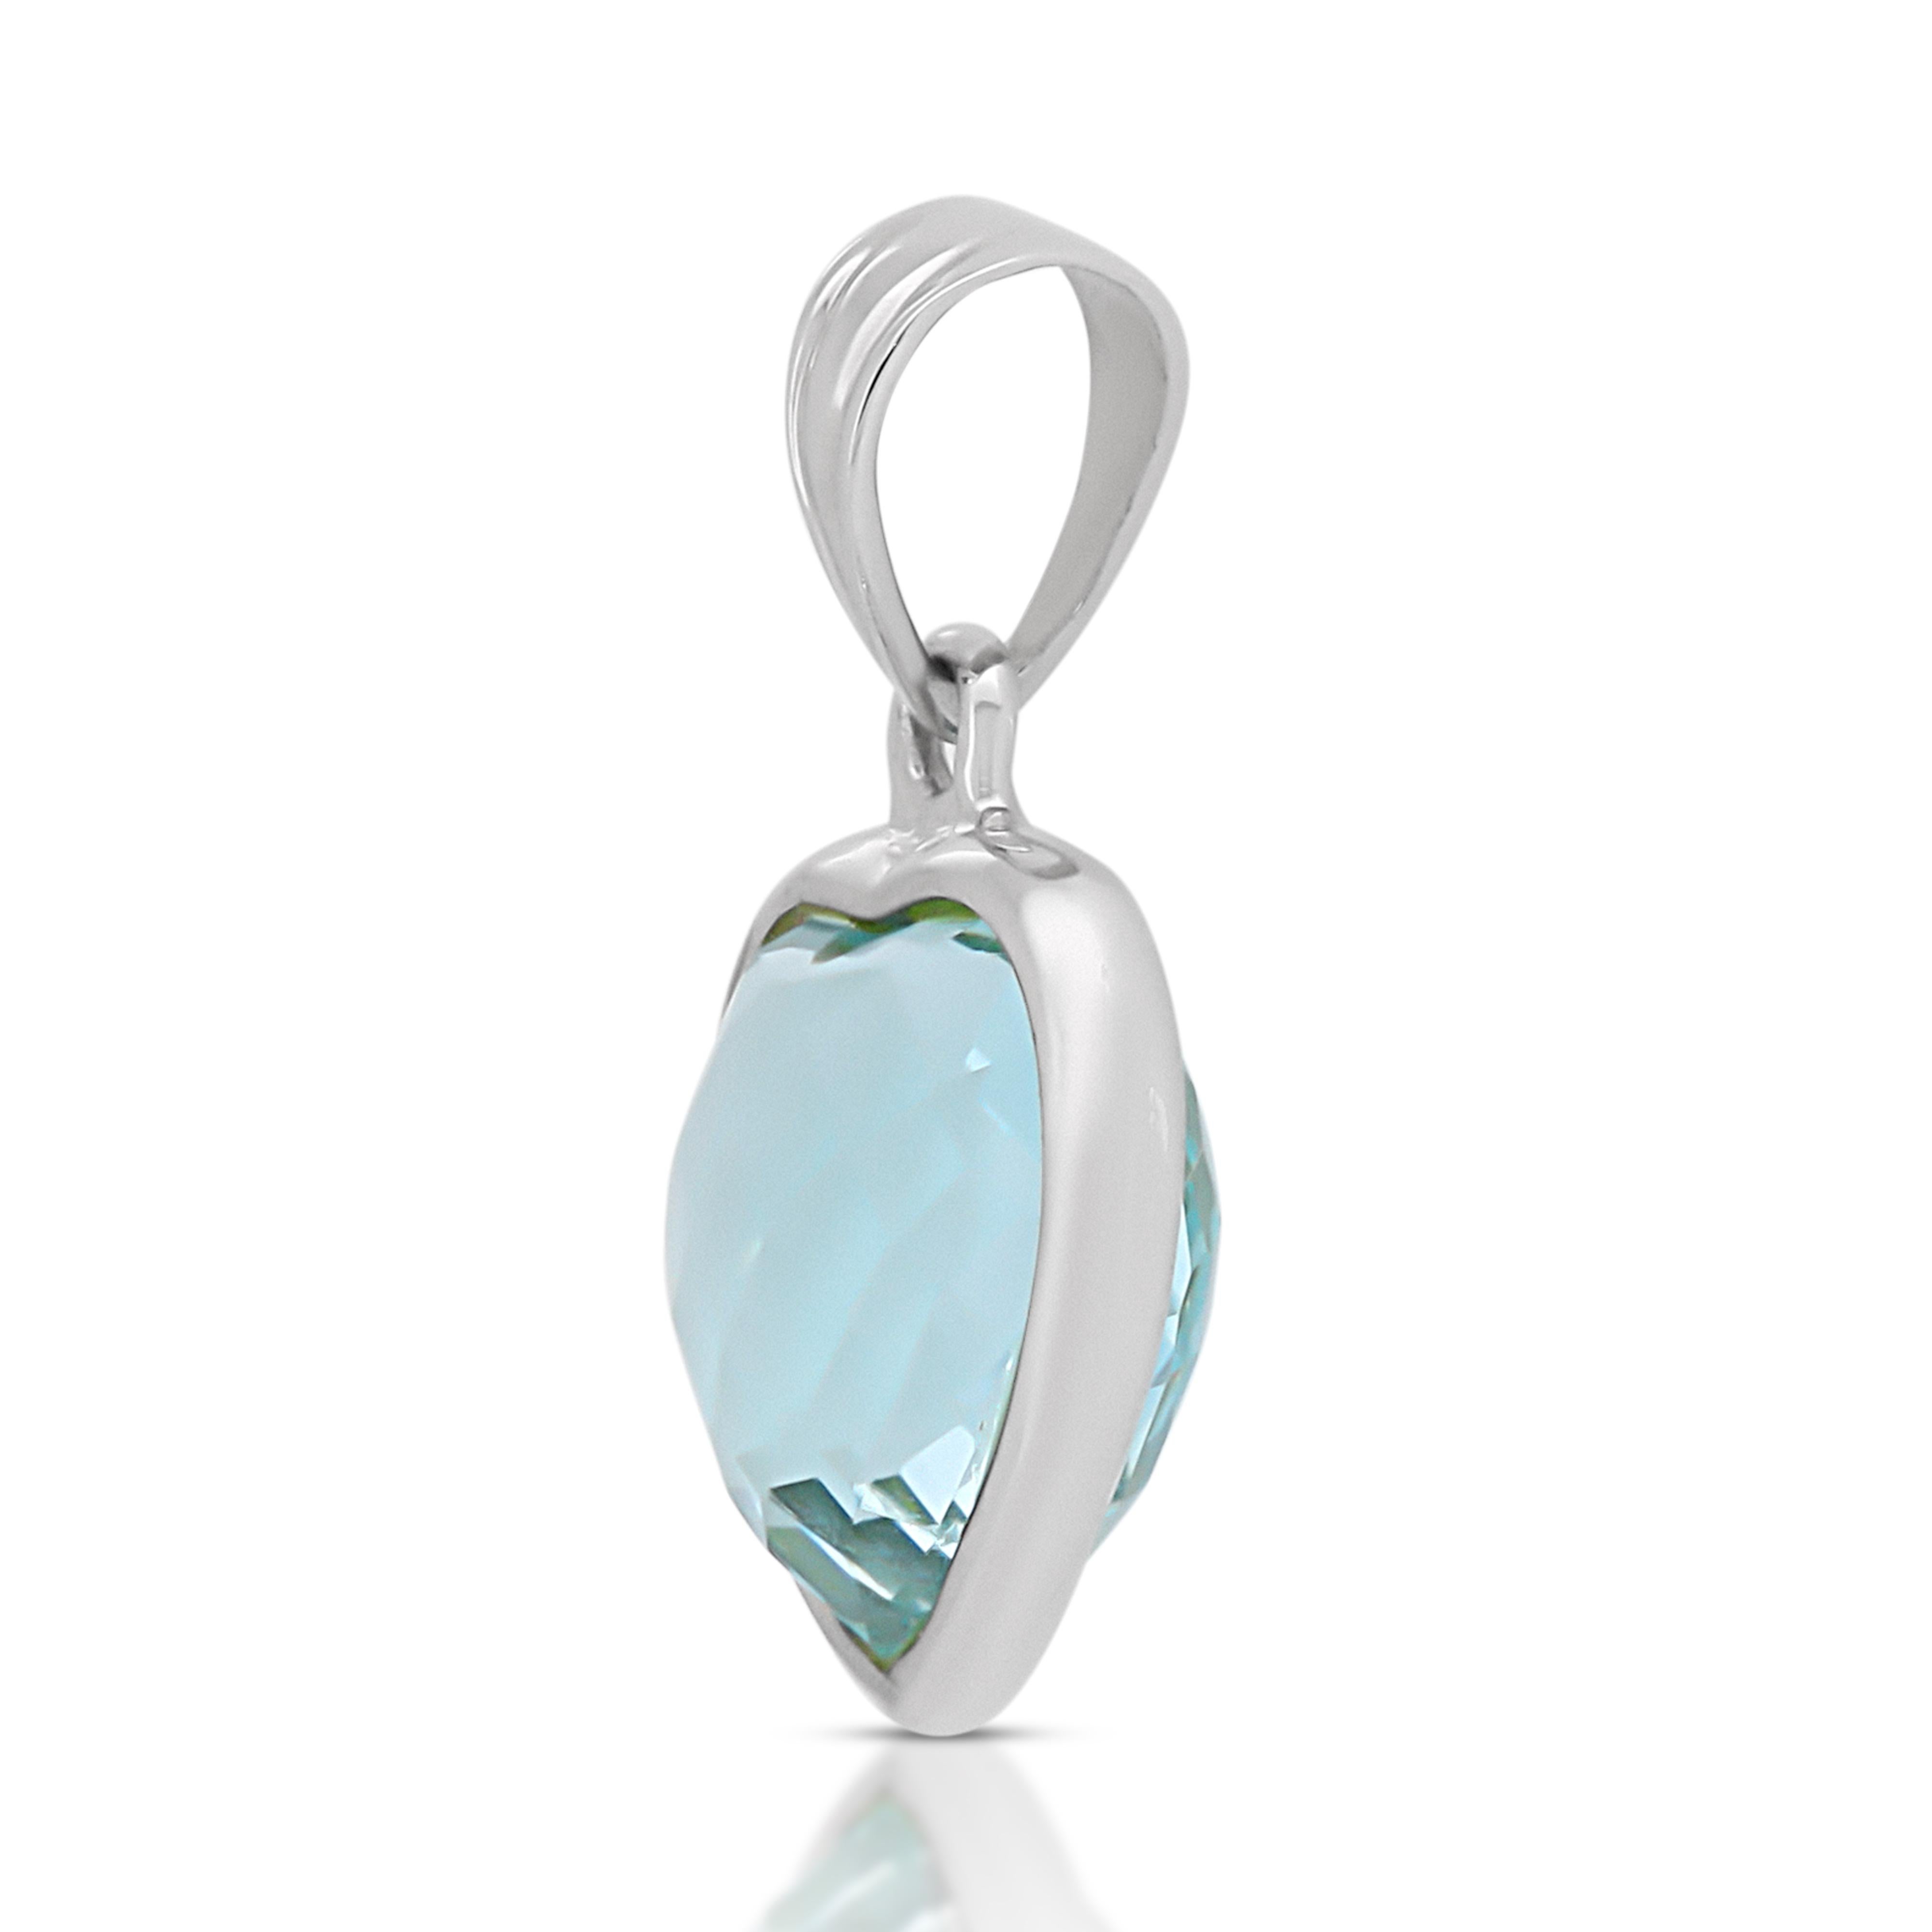 This exquisite pendant showcases a stunning 1.0ct blue topaz, meticulously set in gleaming 18K white gold. The captivating brilliance of the topaz is sure to turn heads and make a lasting impression. The cool tones of the white gold beautifully